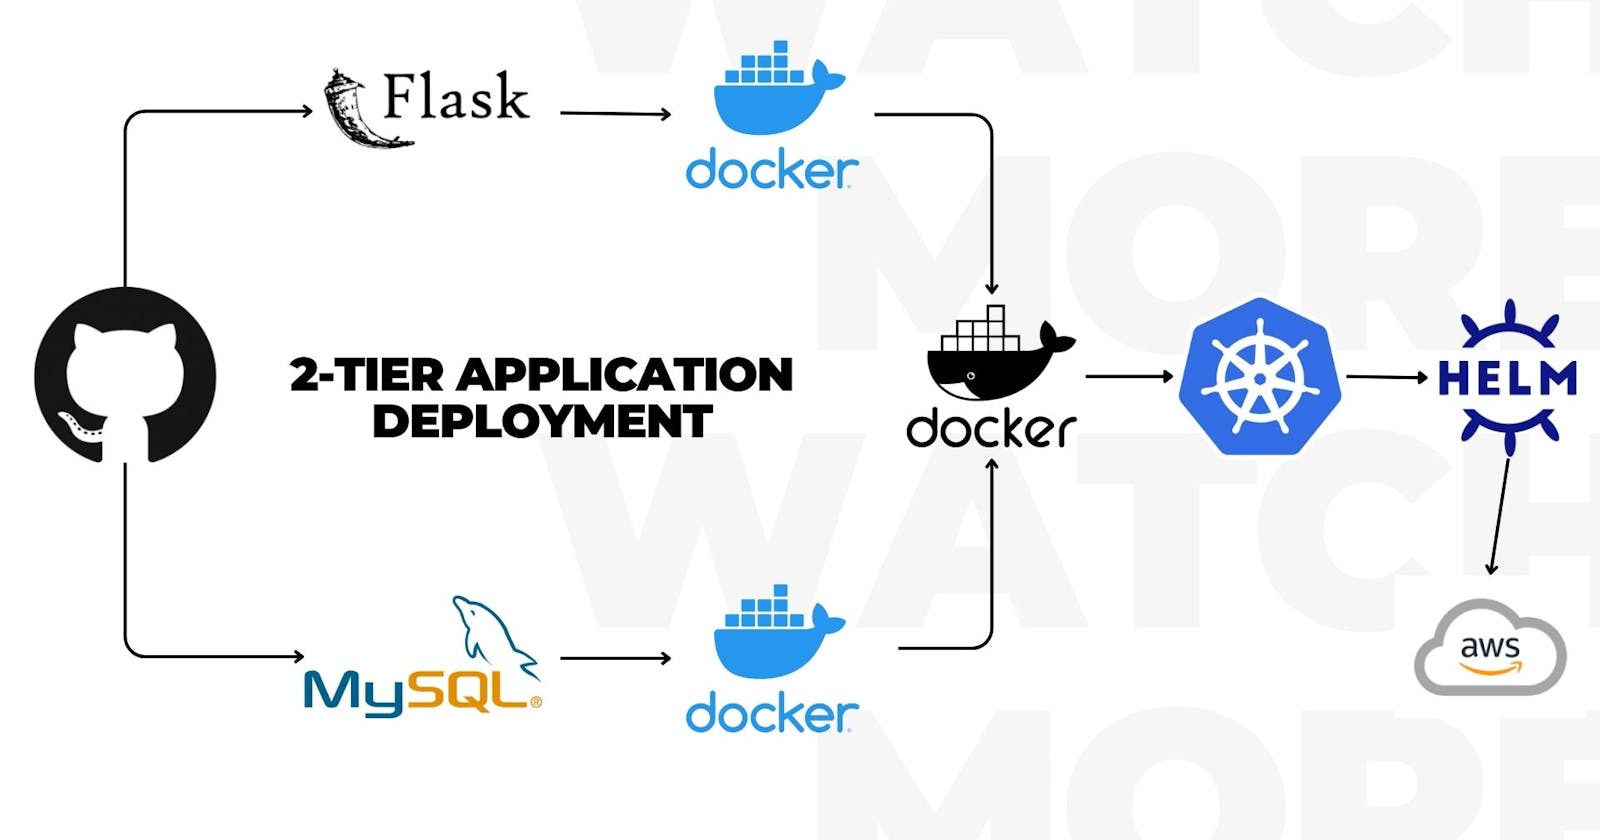 Deployment of 2-tier python-flask applications with the help of Docker, Kubernetes, AWS, and HELM packaging.